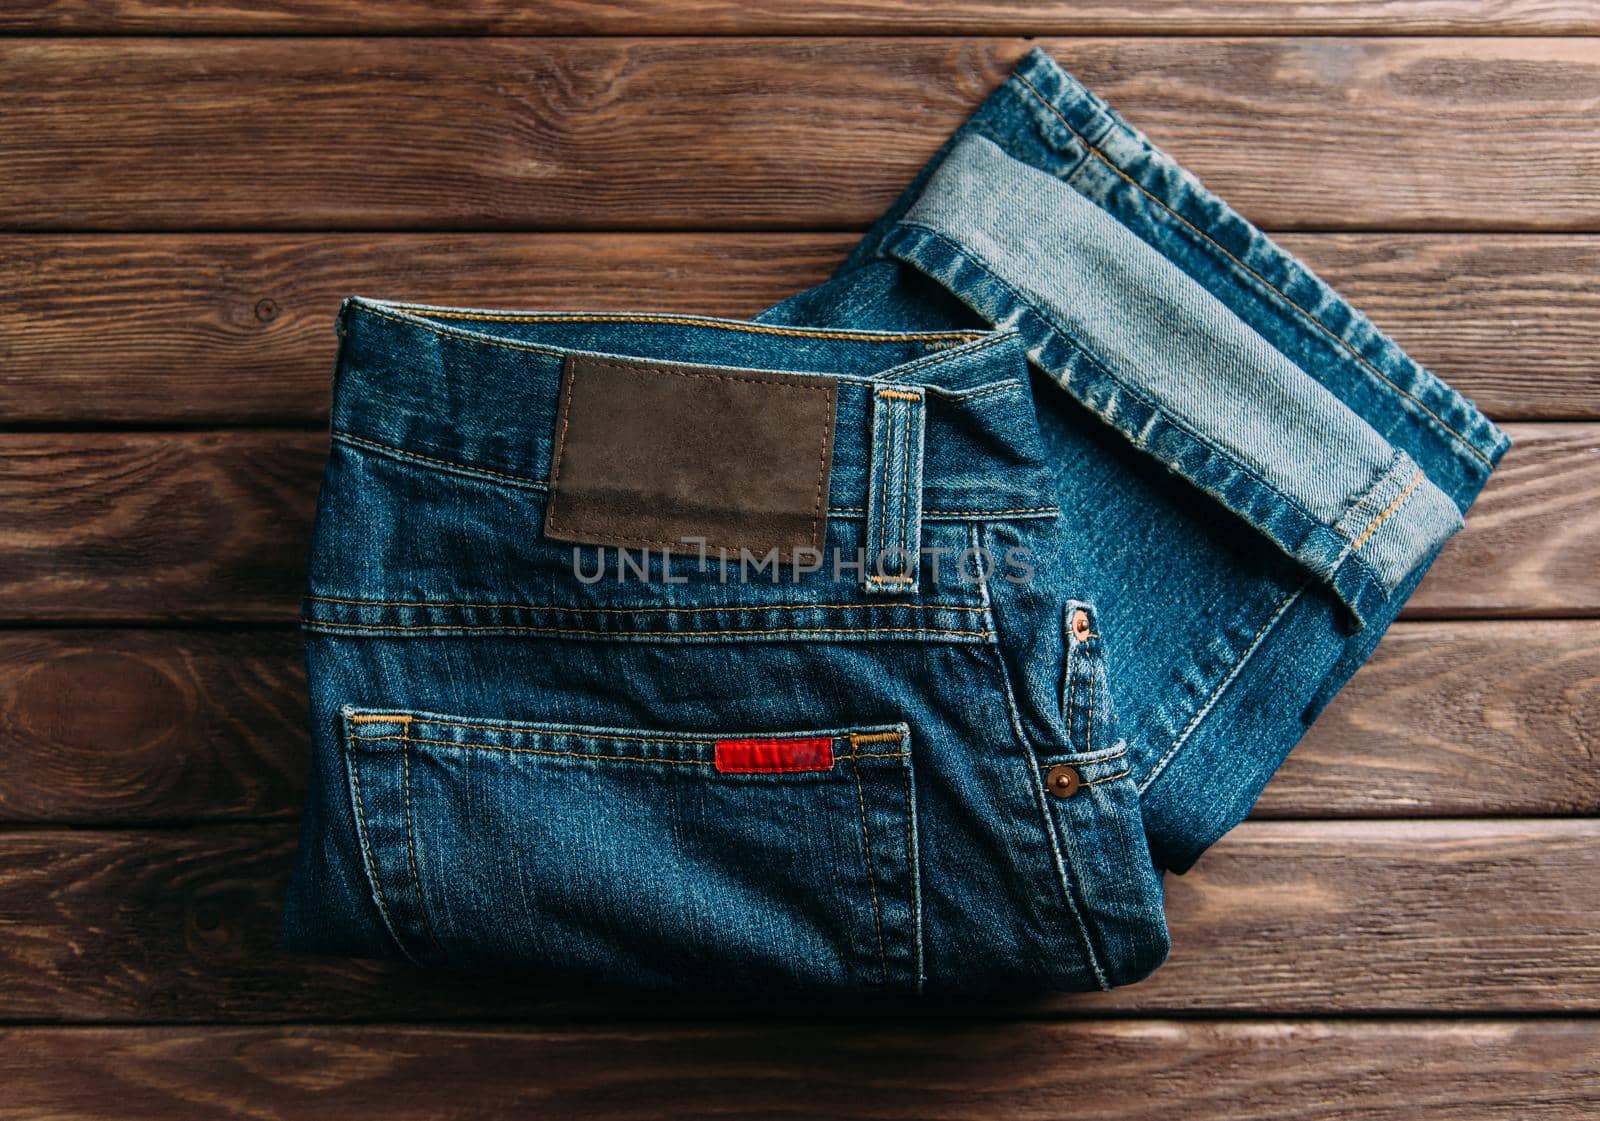 Blue jeans denim pants on a wooden background, top view.